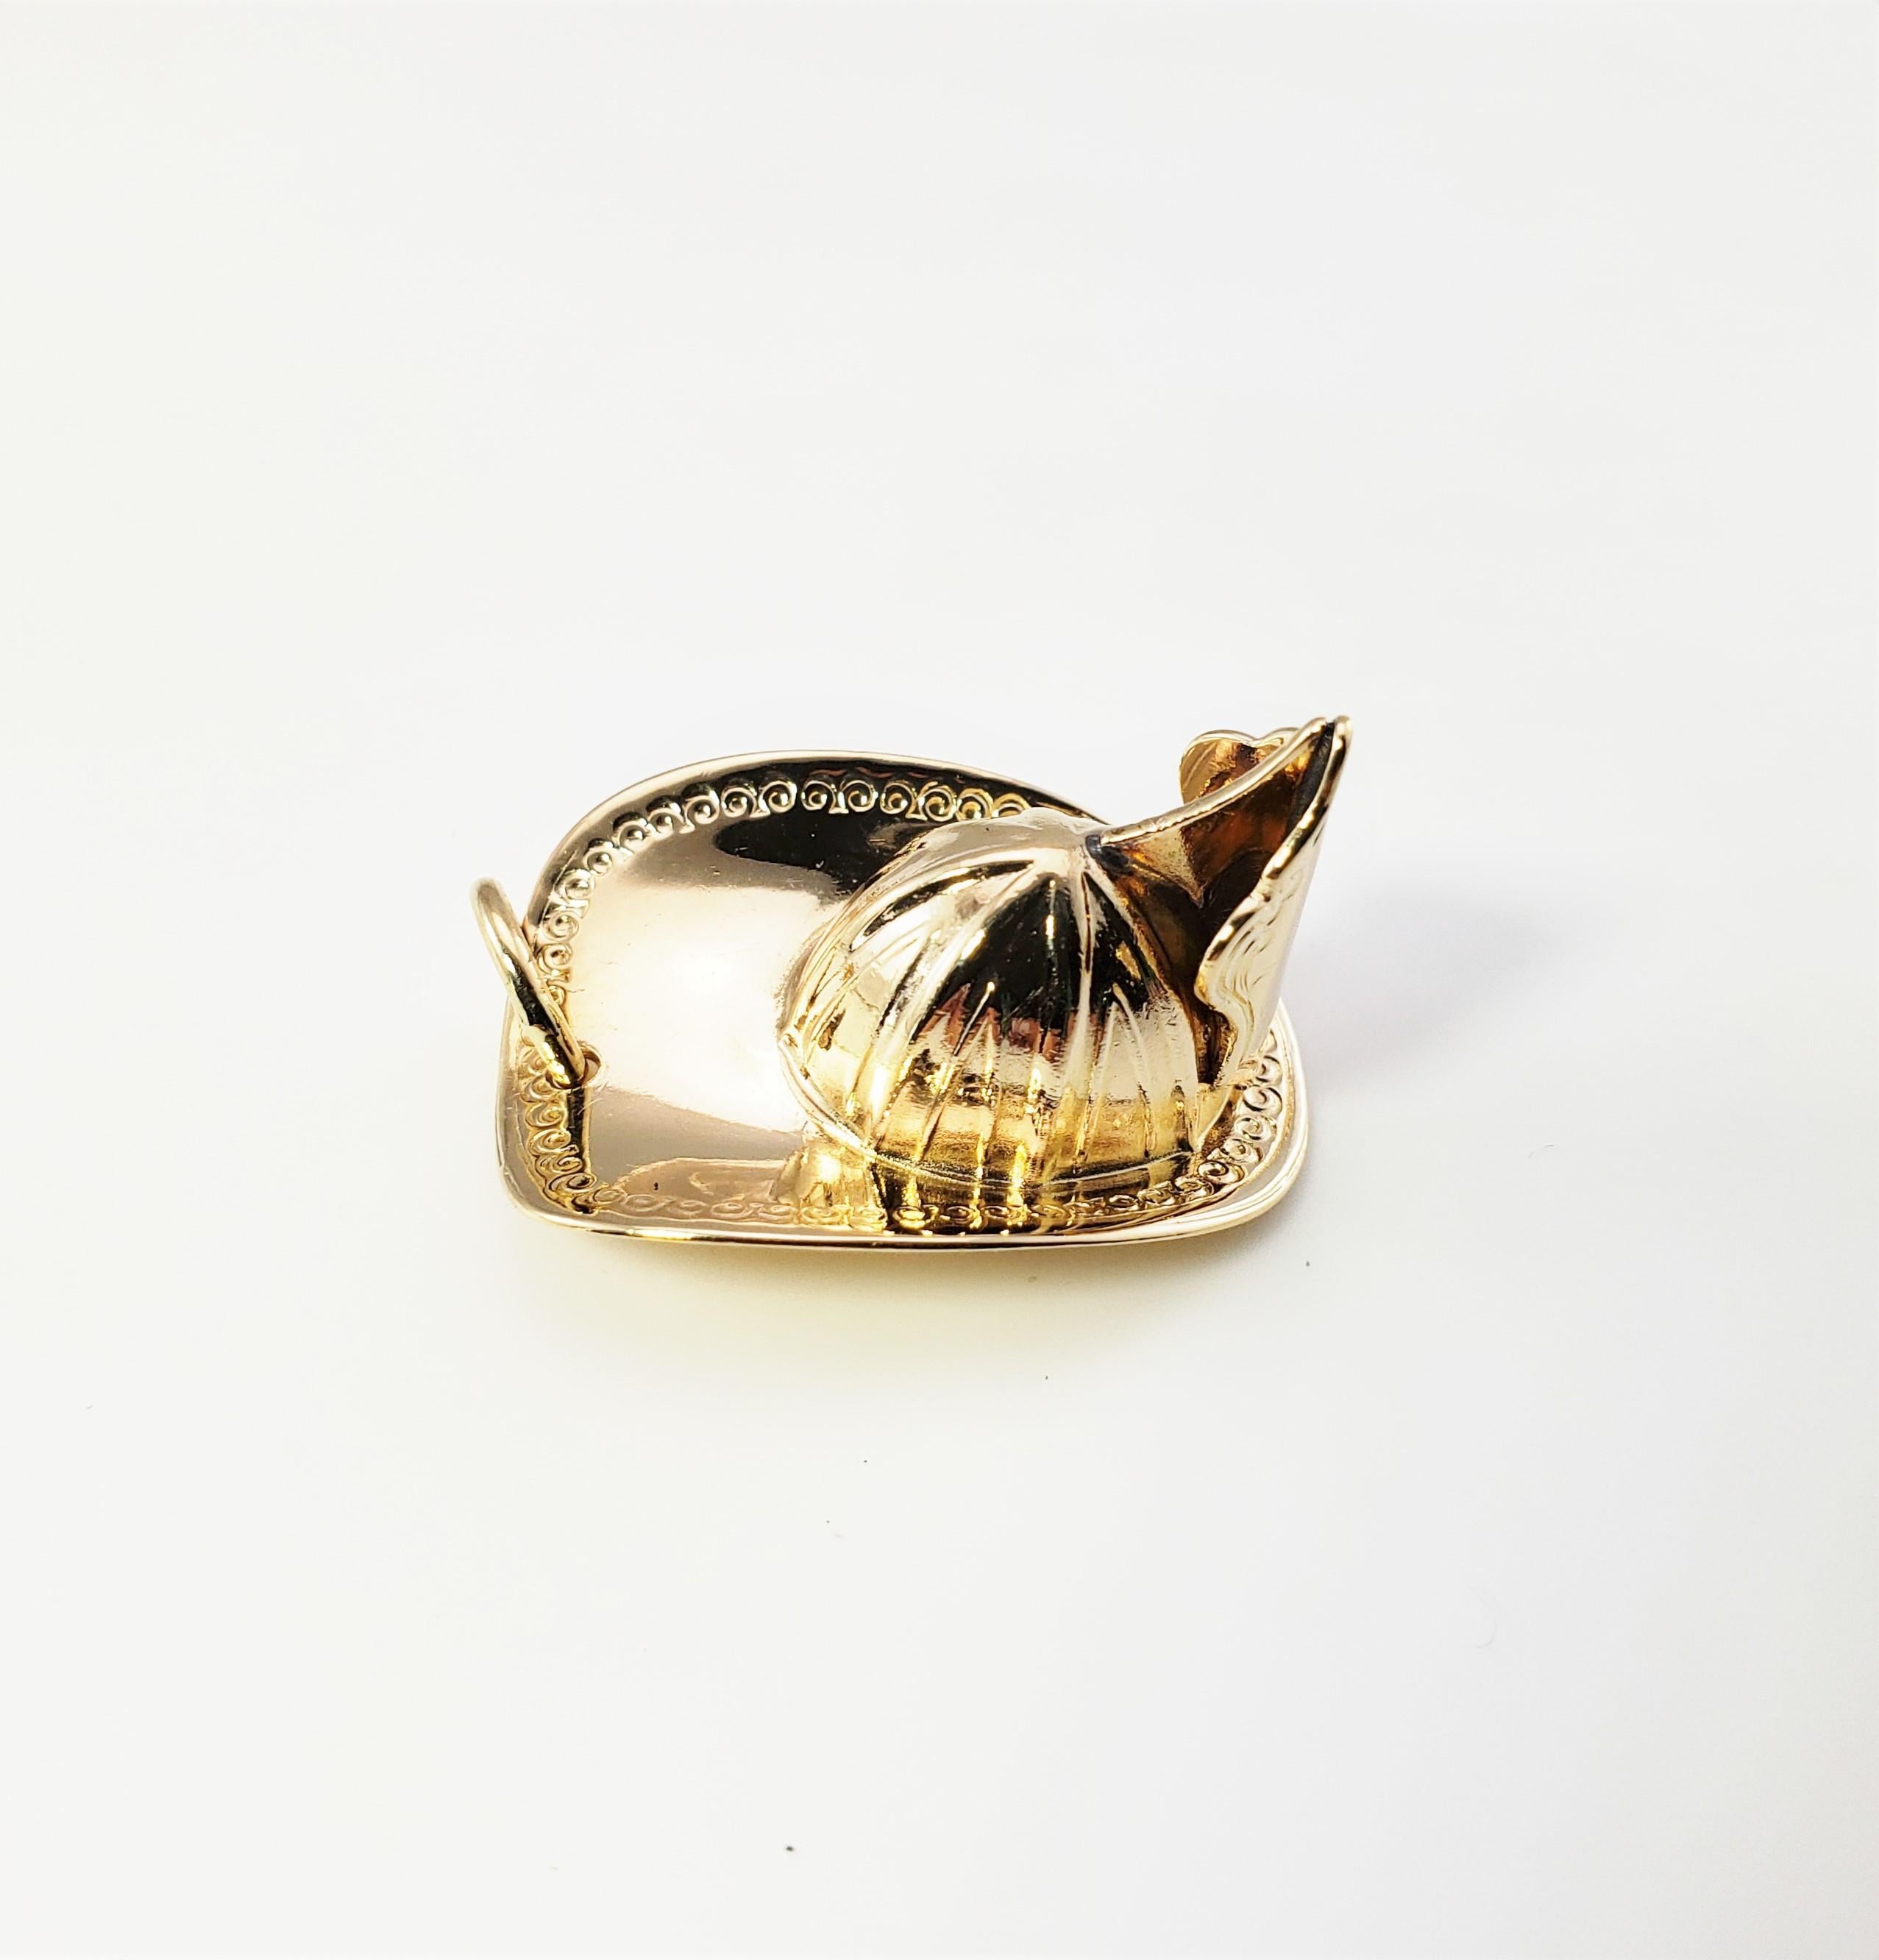 14 Karat Yellow Gold Fireman's Helmet Charm-

This lovely 3D charm features a miniature fireman's helmet meticulously detailed in 14K yellow gold.

Size: 24 mm x 15 mm

Weight:  3.3 dwt. /  5.2 gr.

Stamped: 14K

*Chain not included

Very good